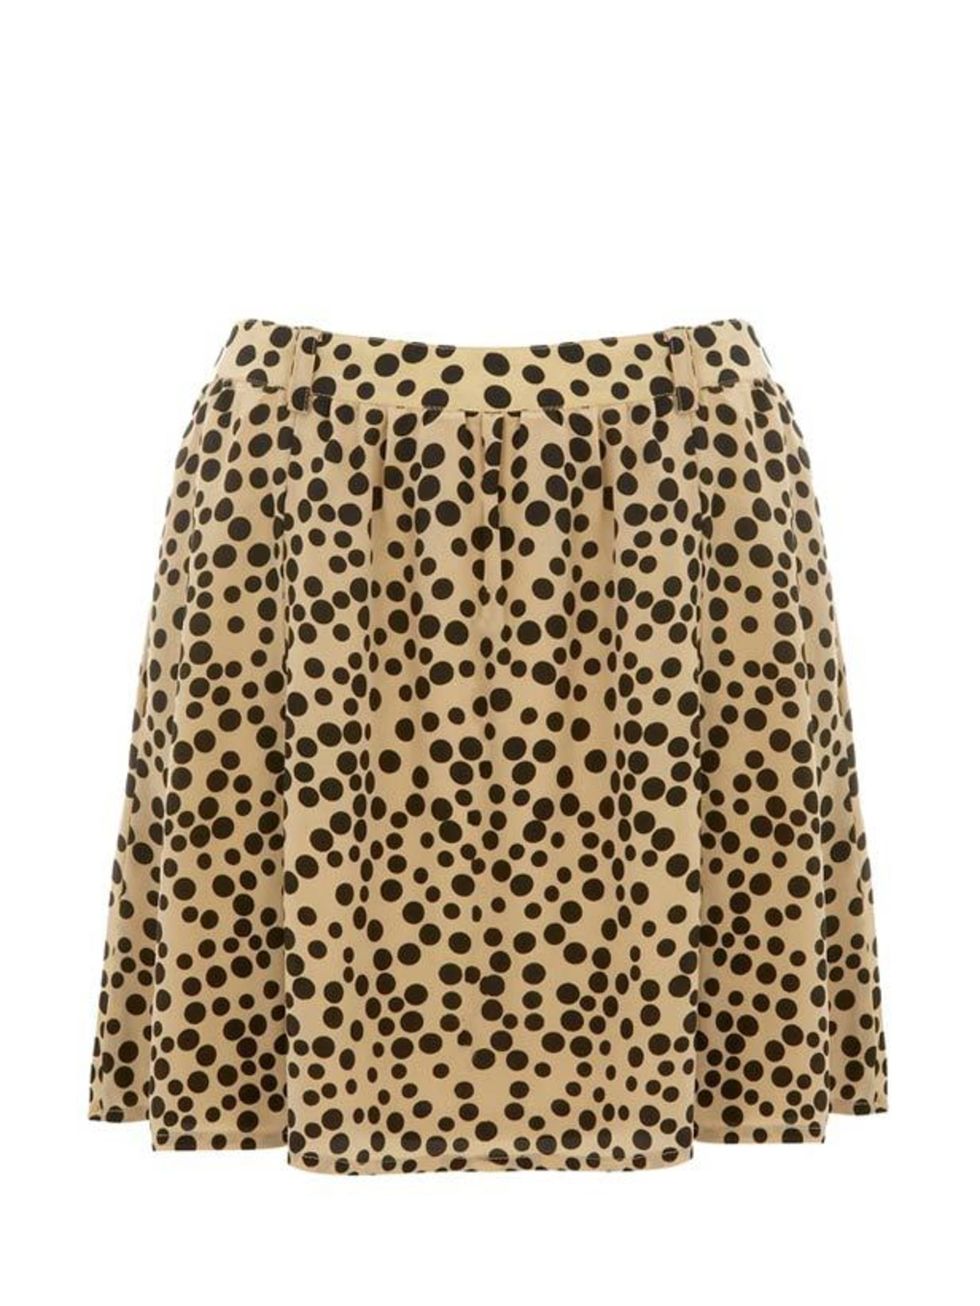 <p>Leopard print is having a fashion moment and this silk skater skirt is a super-cute way to tap into the trend. Friend of Mine skirt, £175, at <a href="http://www.bunnyhug.co.uk/fashionshop/gbu0-prodshow/Friend_of_Mine_Camel_Leopard_Spot_Print_Silk_Chlo